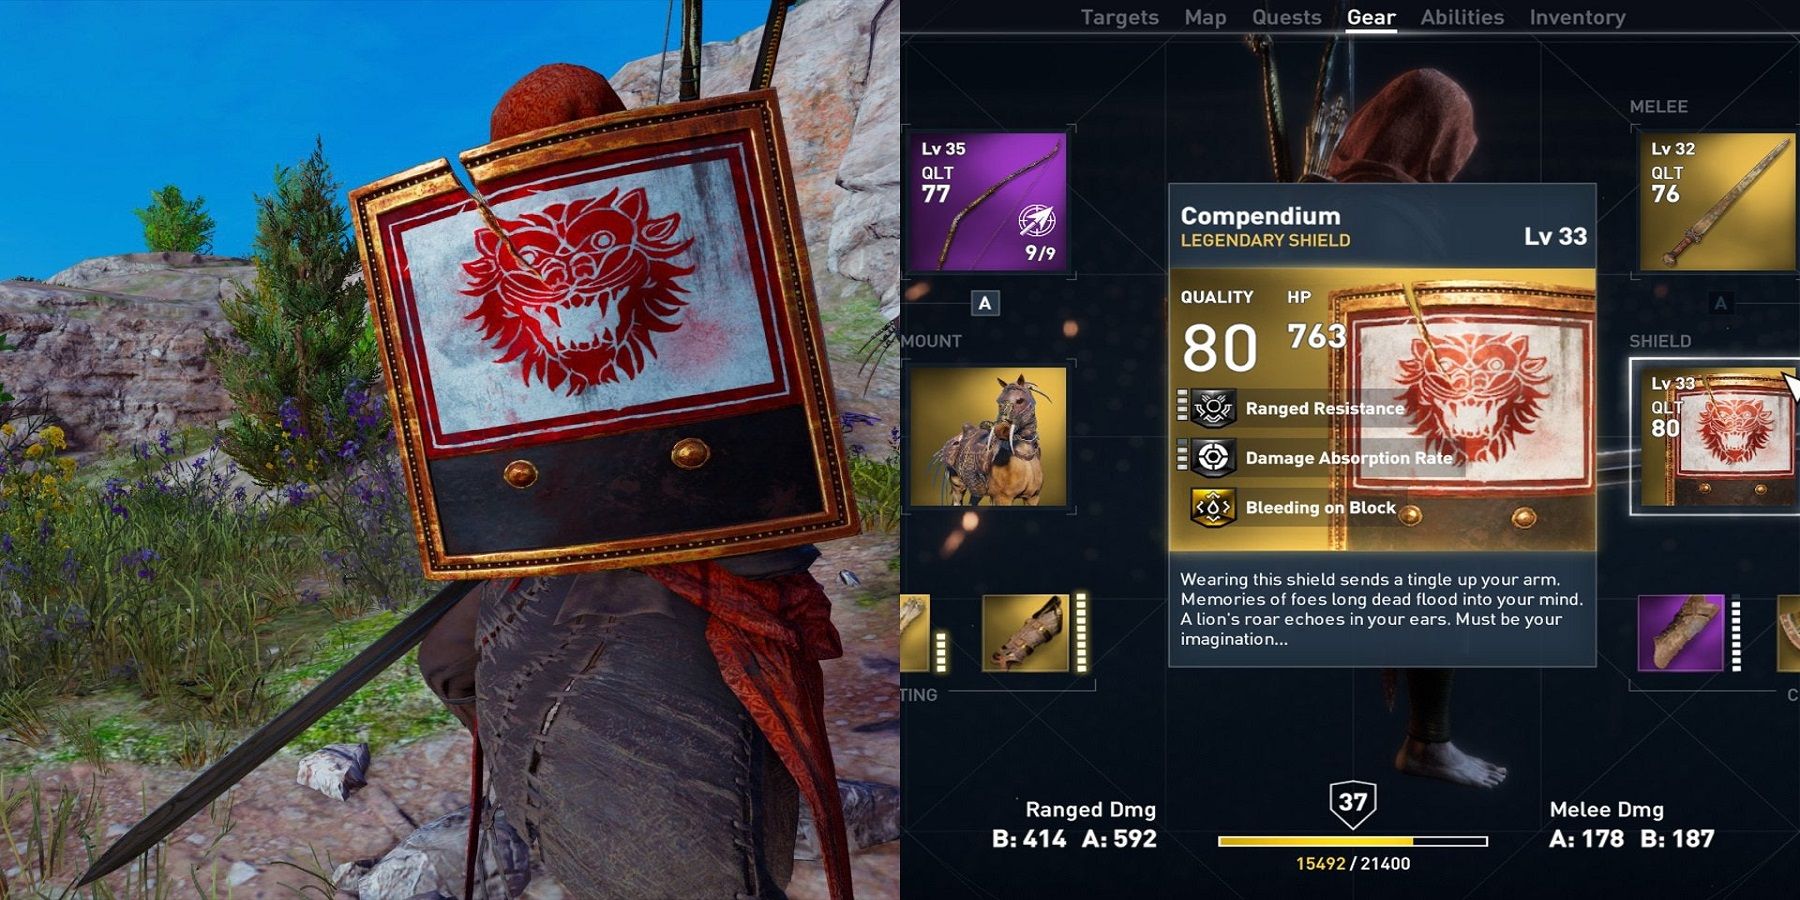 The compendium shield and the inventory page description 